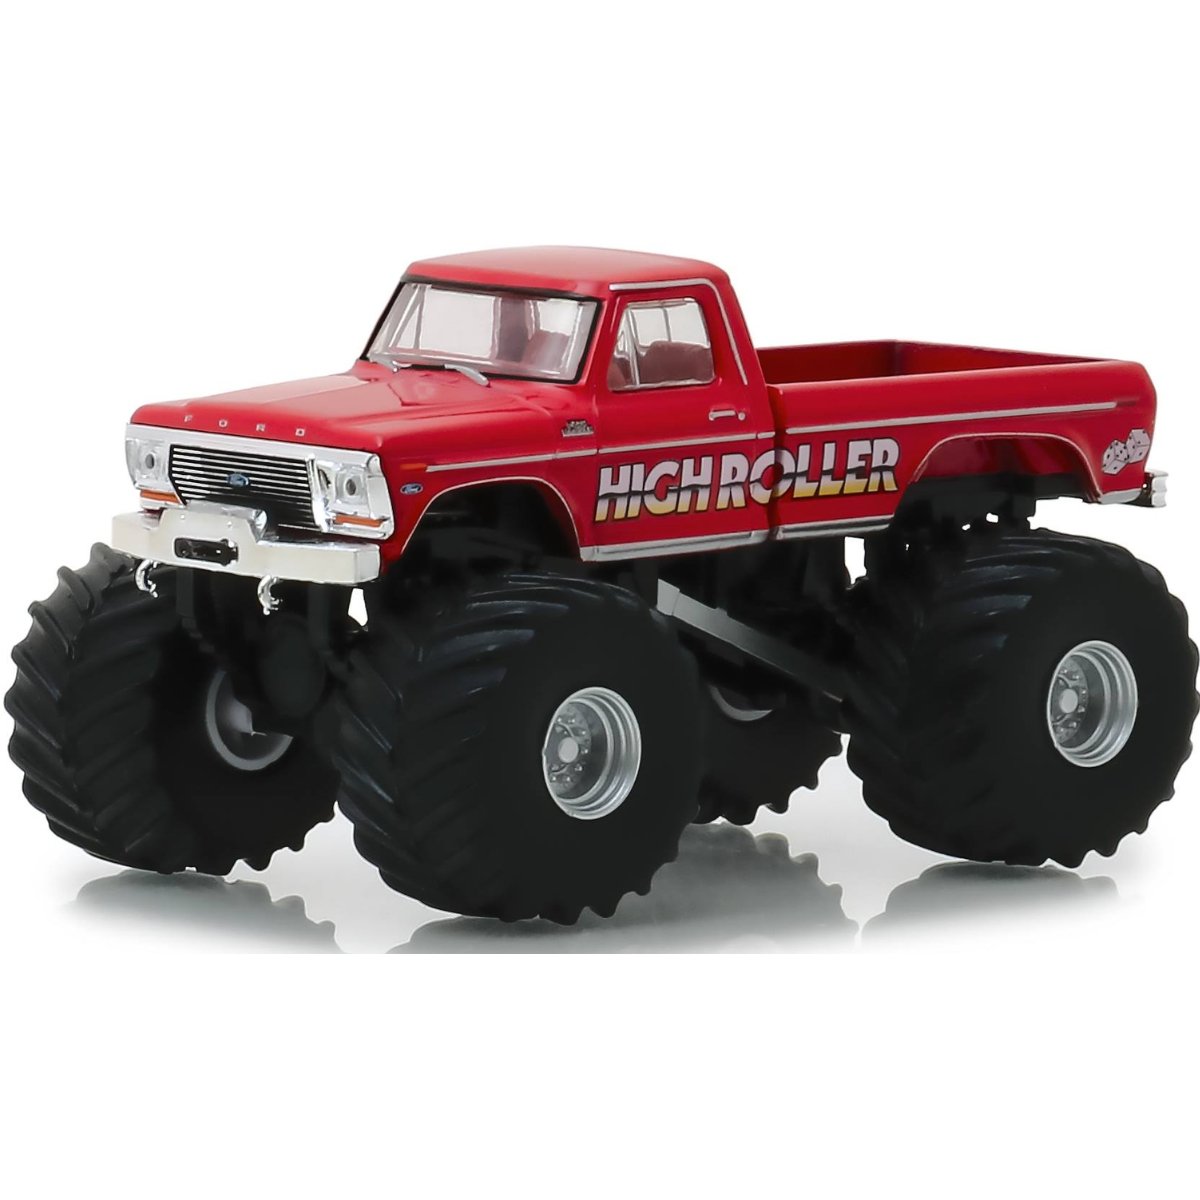 Greenlight 1979 Ford F-350 High Roller - 1:64 Scale - Phillips Hobbies